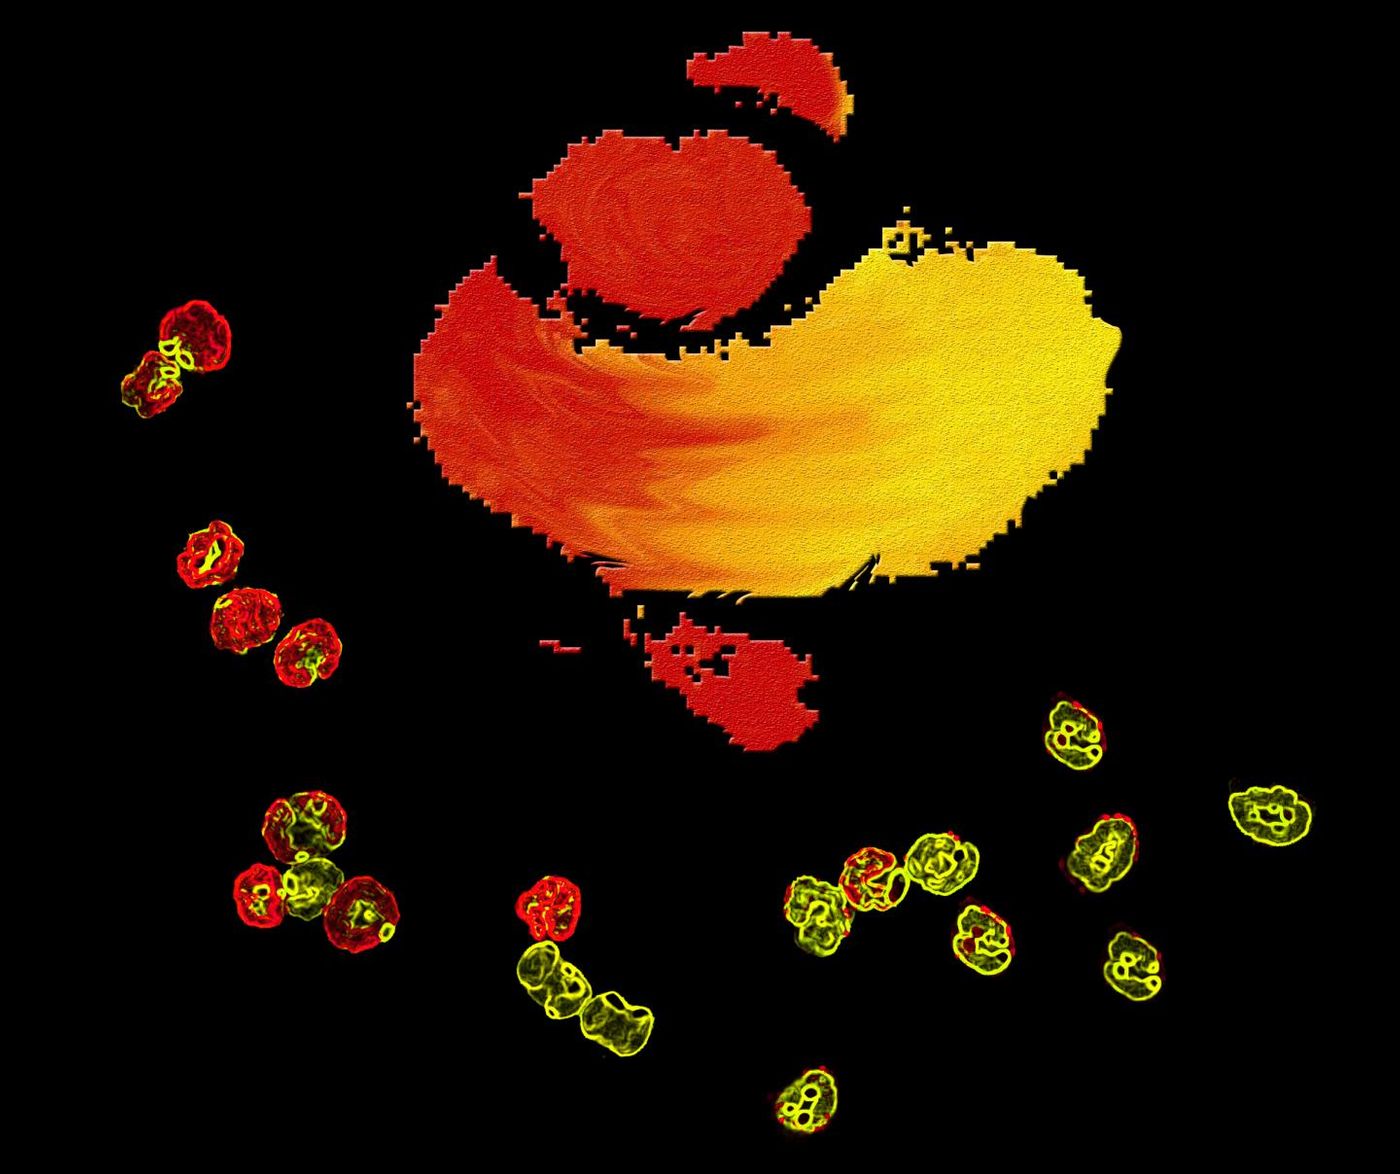 The top left cells represent neutrophil progenitors and the right bottom ones are fully differentiated neutrophils. The color of nucleus matches the color on the viSNE map in the middle, where red indicates higher in the hematopoietic hierarchy and yellow indicates lower. / Credit: Dr. Yanfang Peipei Zhu, La Jolla Institute for Allergy and Immunology